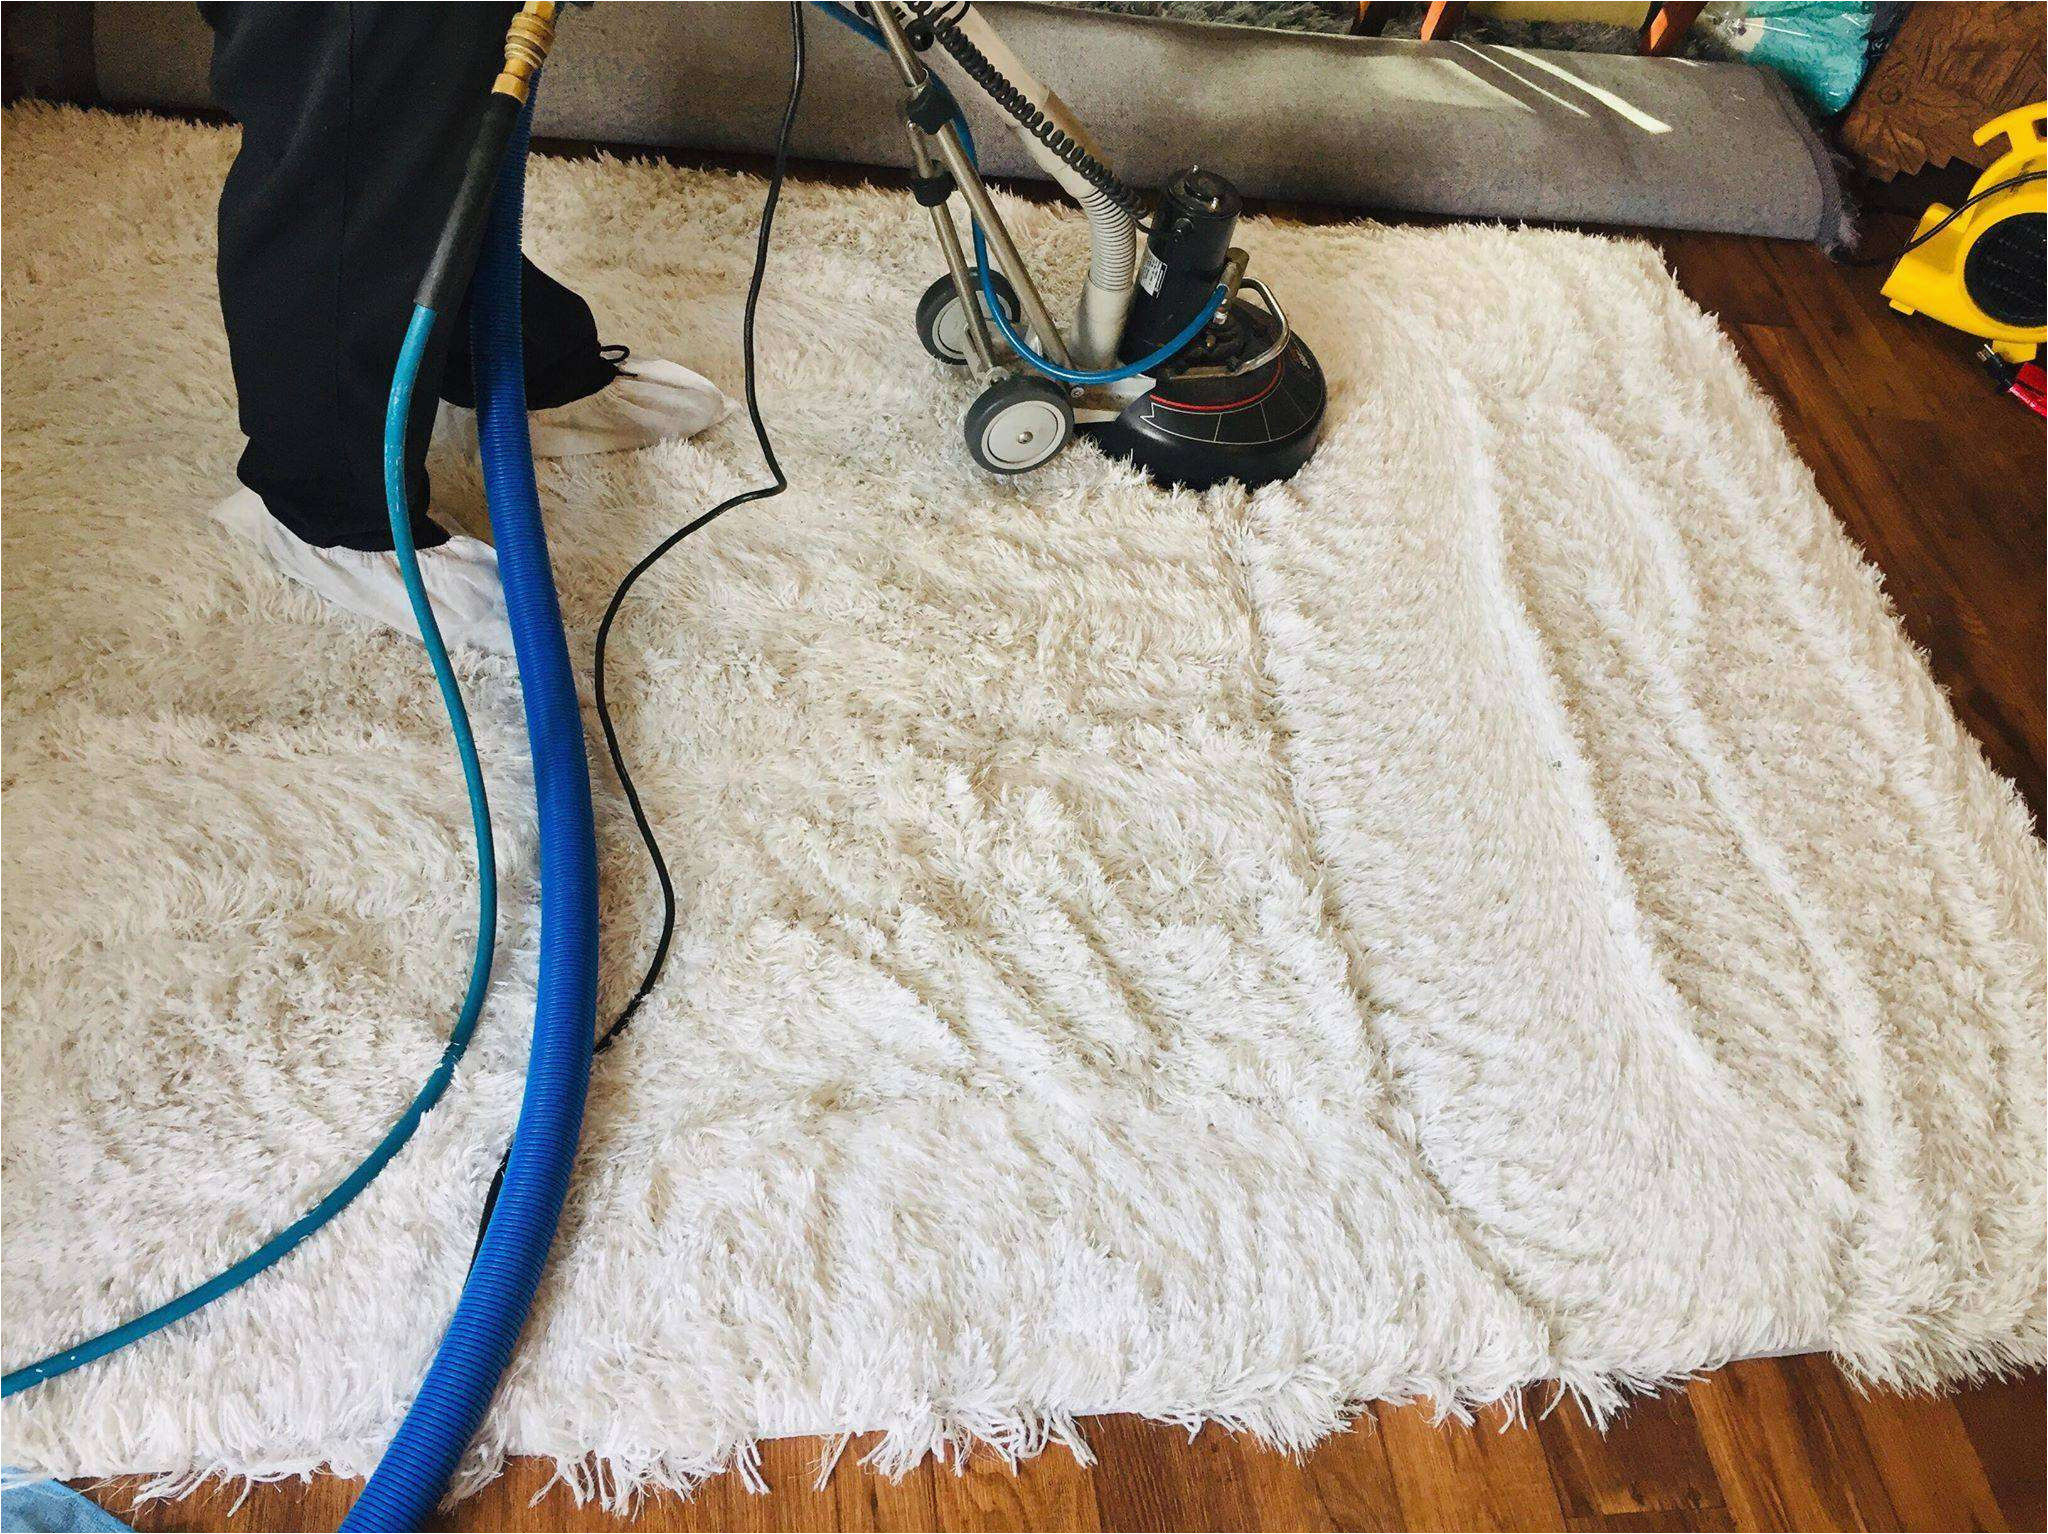 Area Rug Cleaning Augusta Ga area Rug Cleaning In Augusta, Ga – Universal Carpet Cleaning